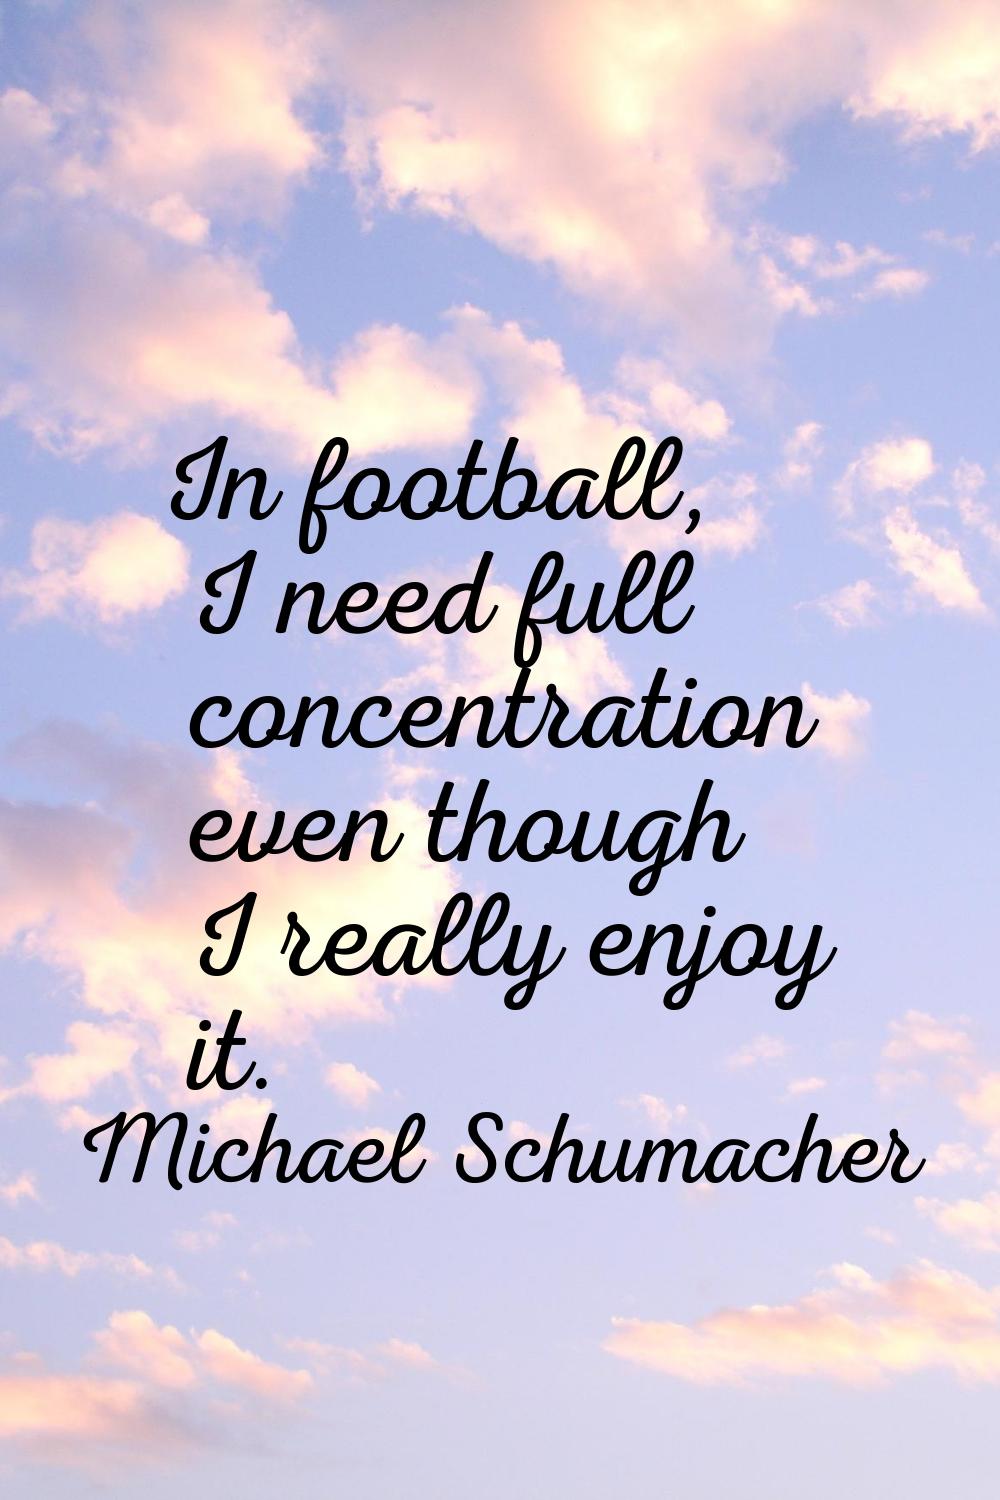 In football, I need full concentration even though I really enjoy it.